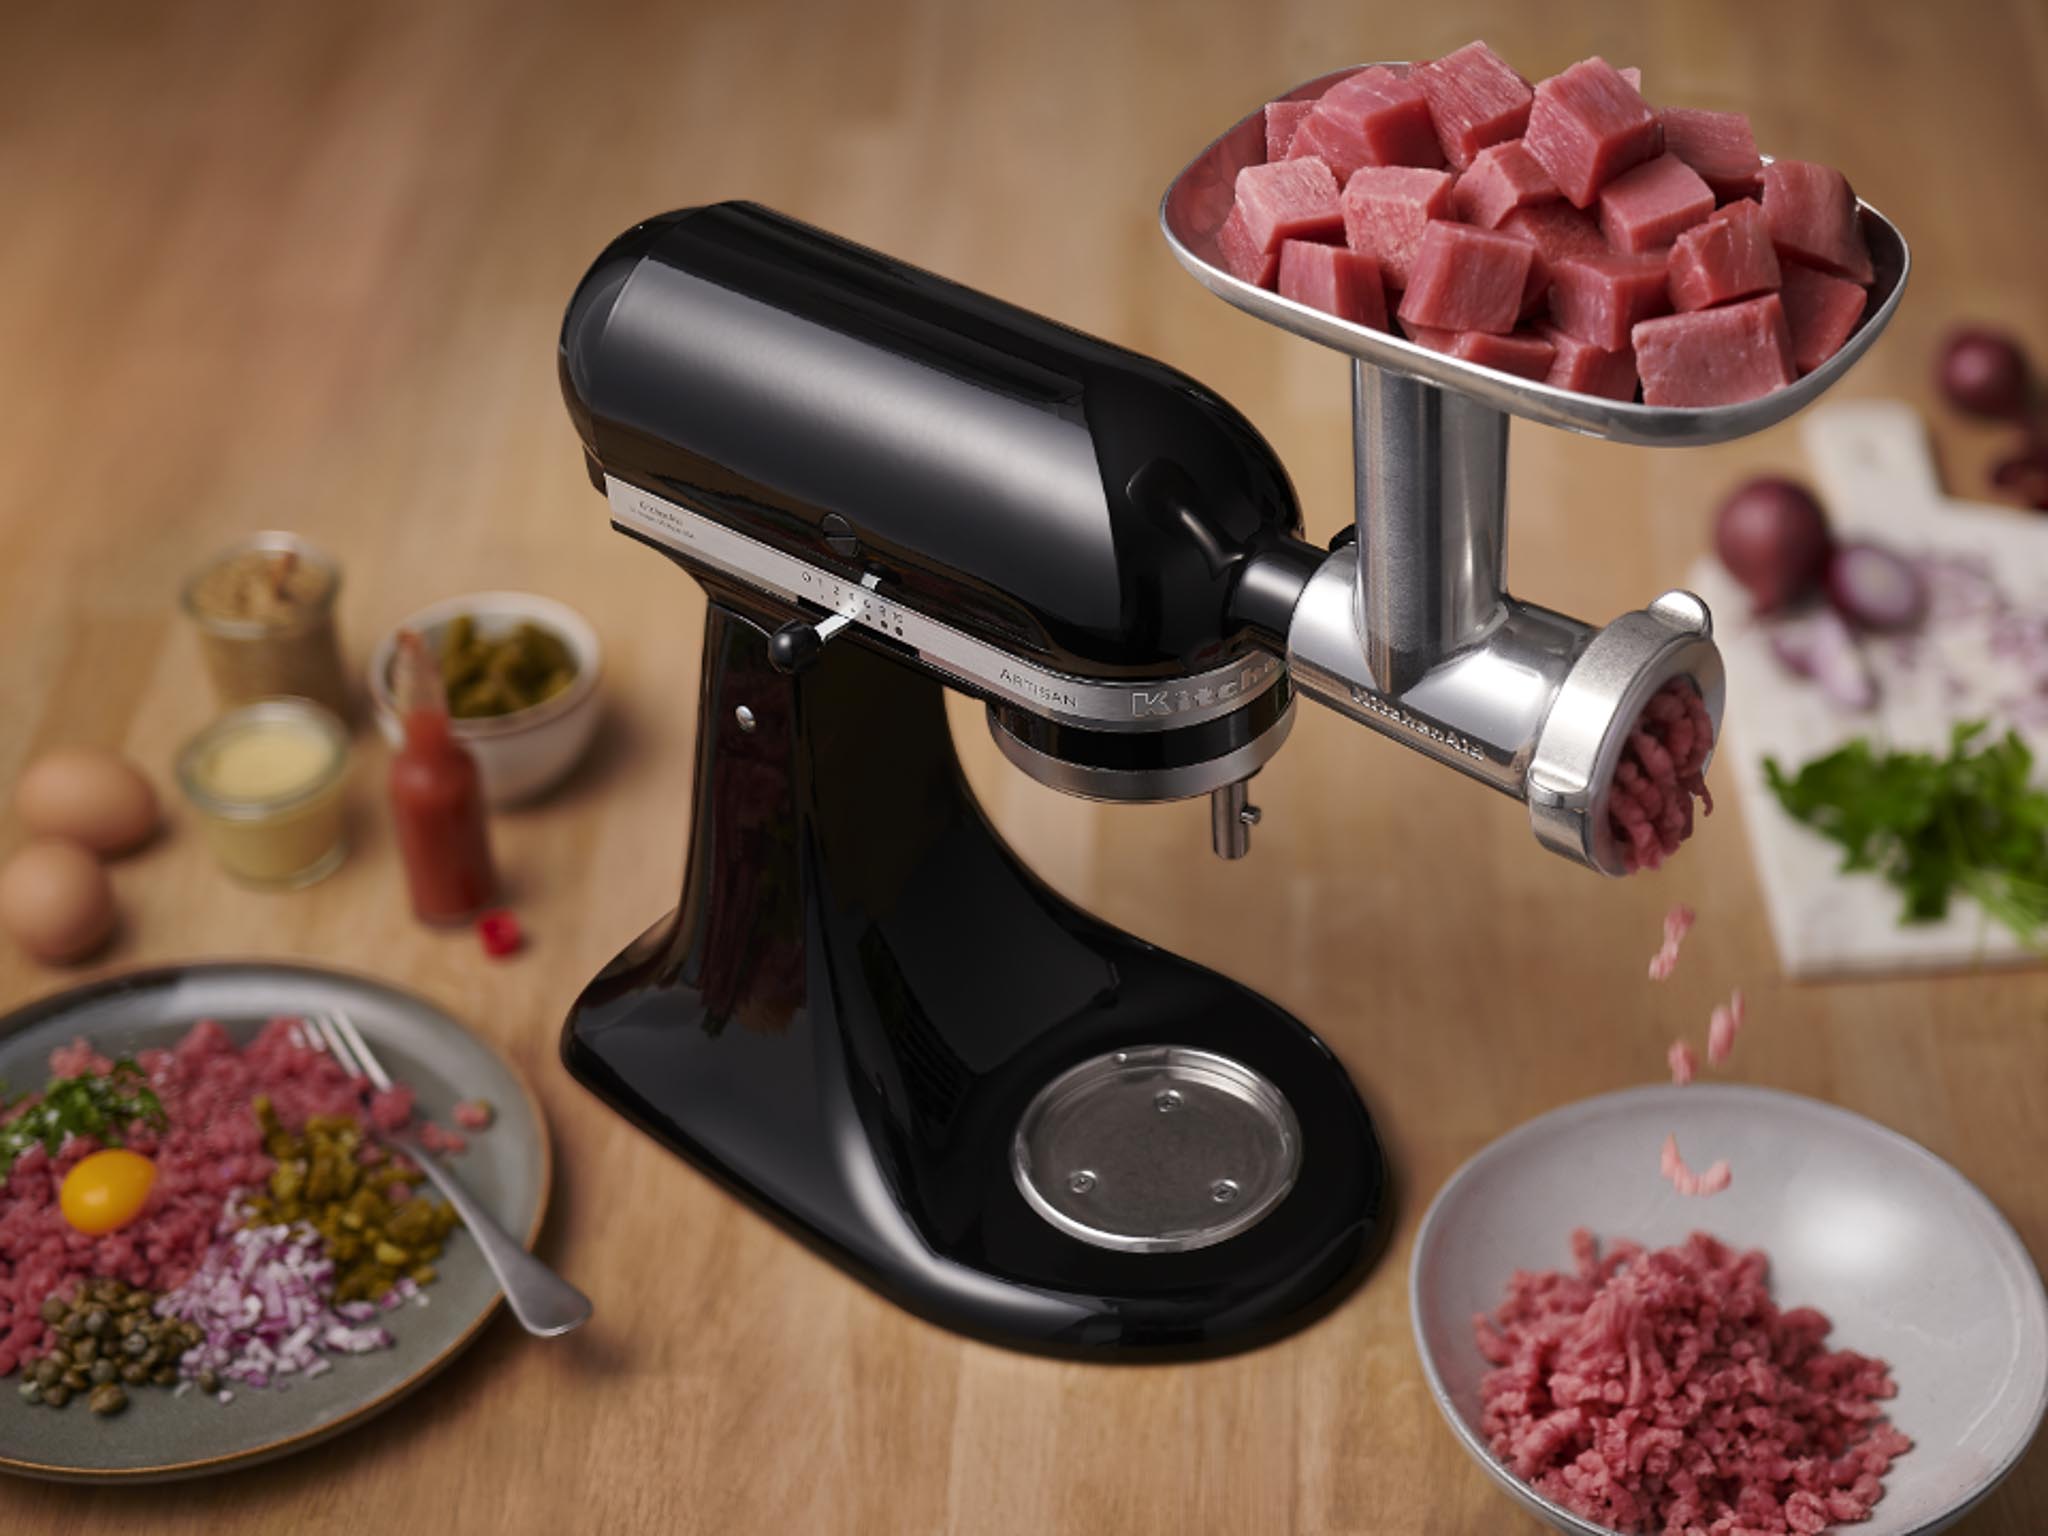 https://images.ctfassets.net/0e6jqcgsrcye/6Z2f84SvCIGAk5HxAtNWg5/91ab63461a6b7cbdd08d6a31608bdd55/Stand-mixer-and-meat-grinder-and-sausage-stuffer-attachment-on-table-grinding-raw-meat.jpg